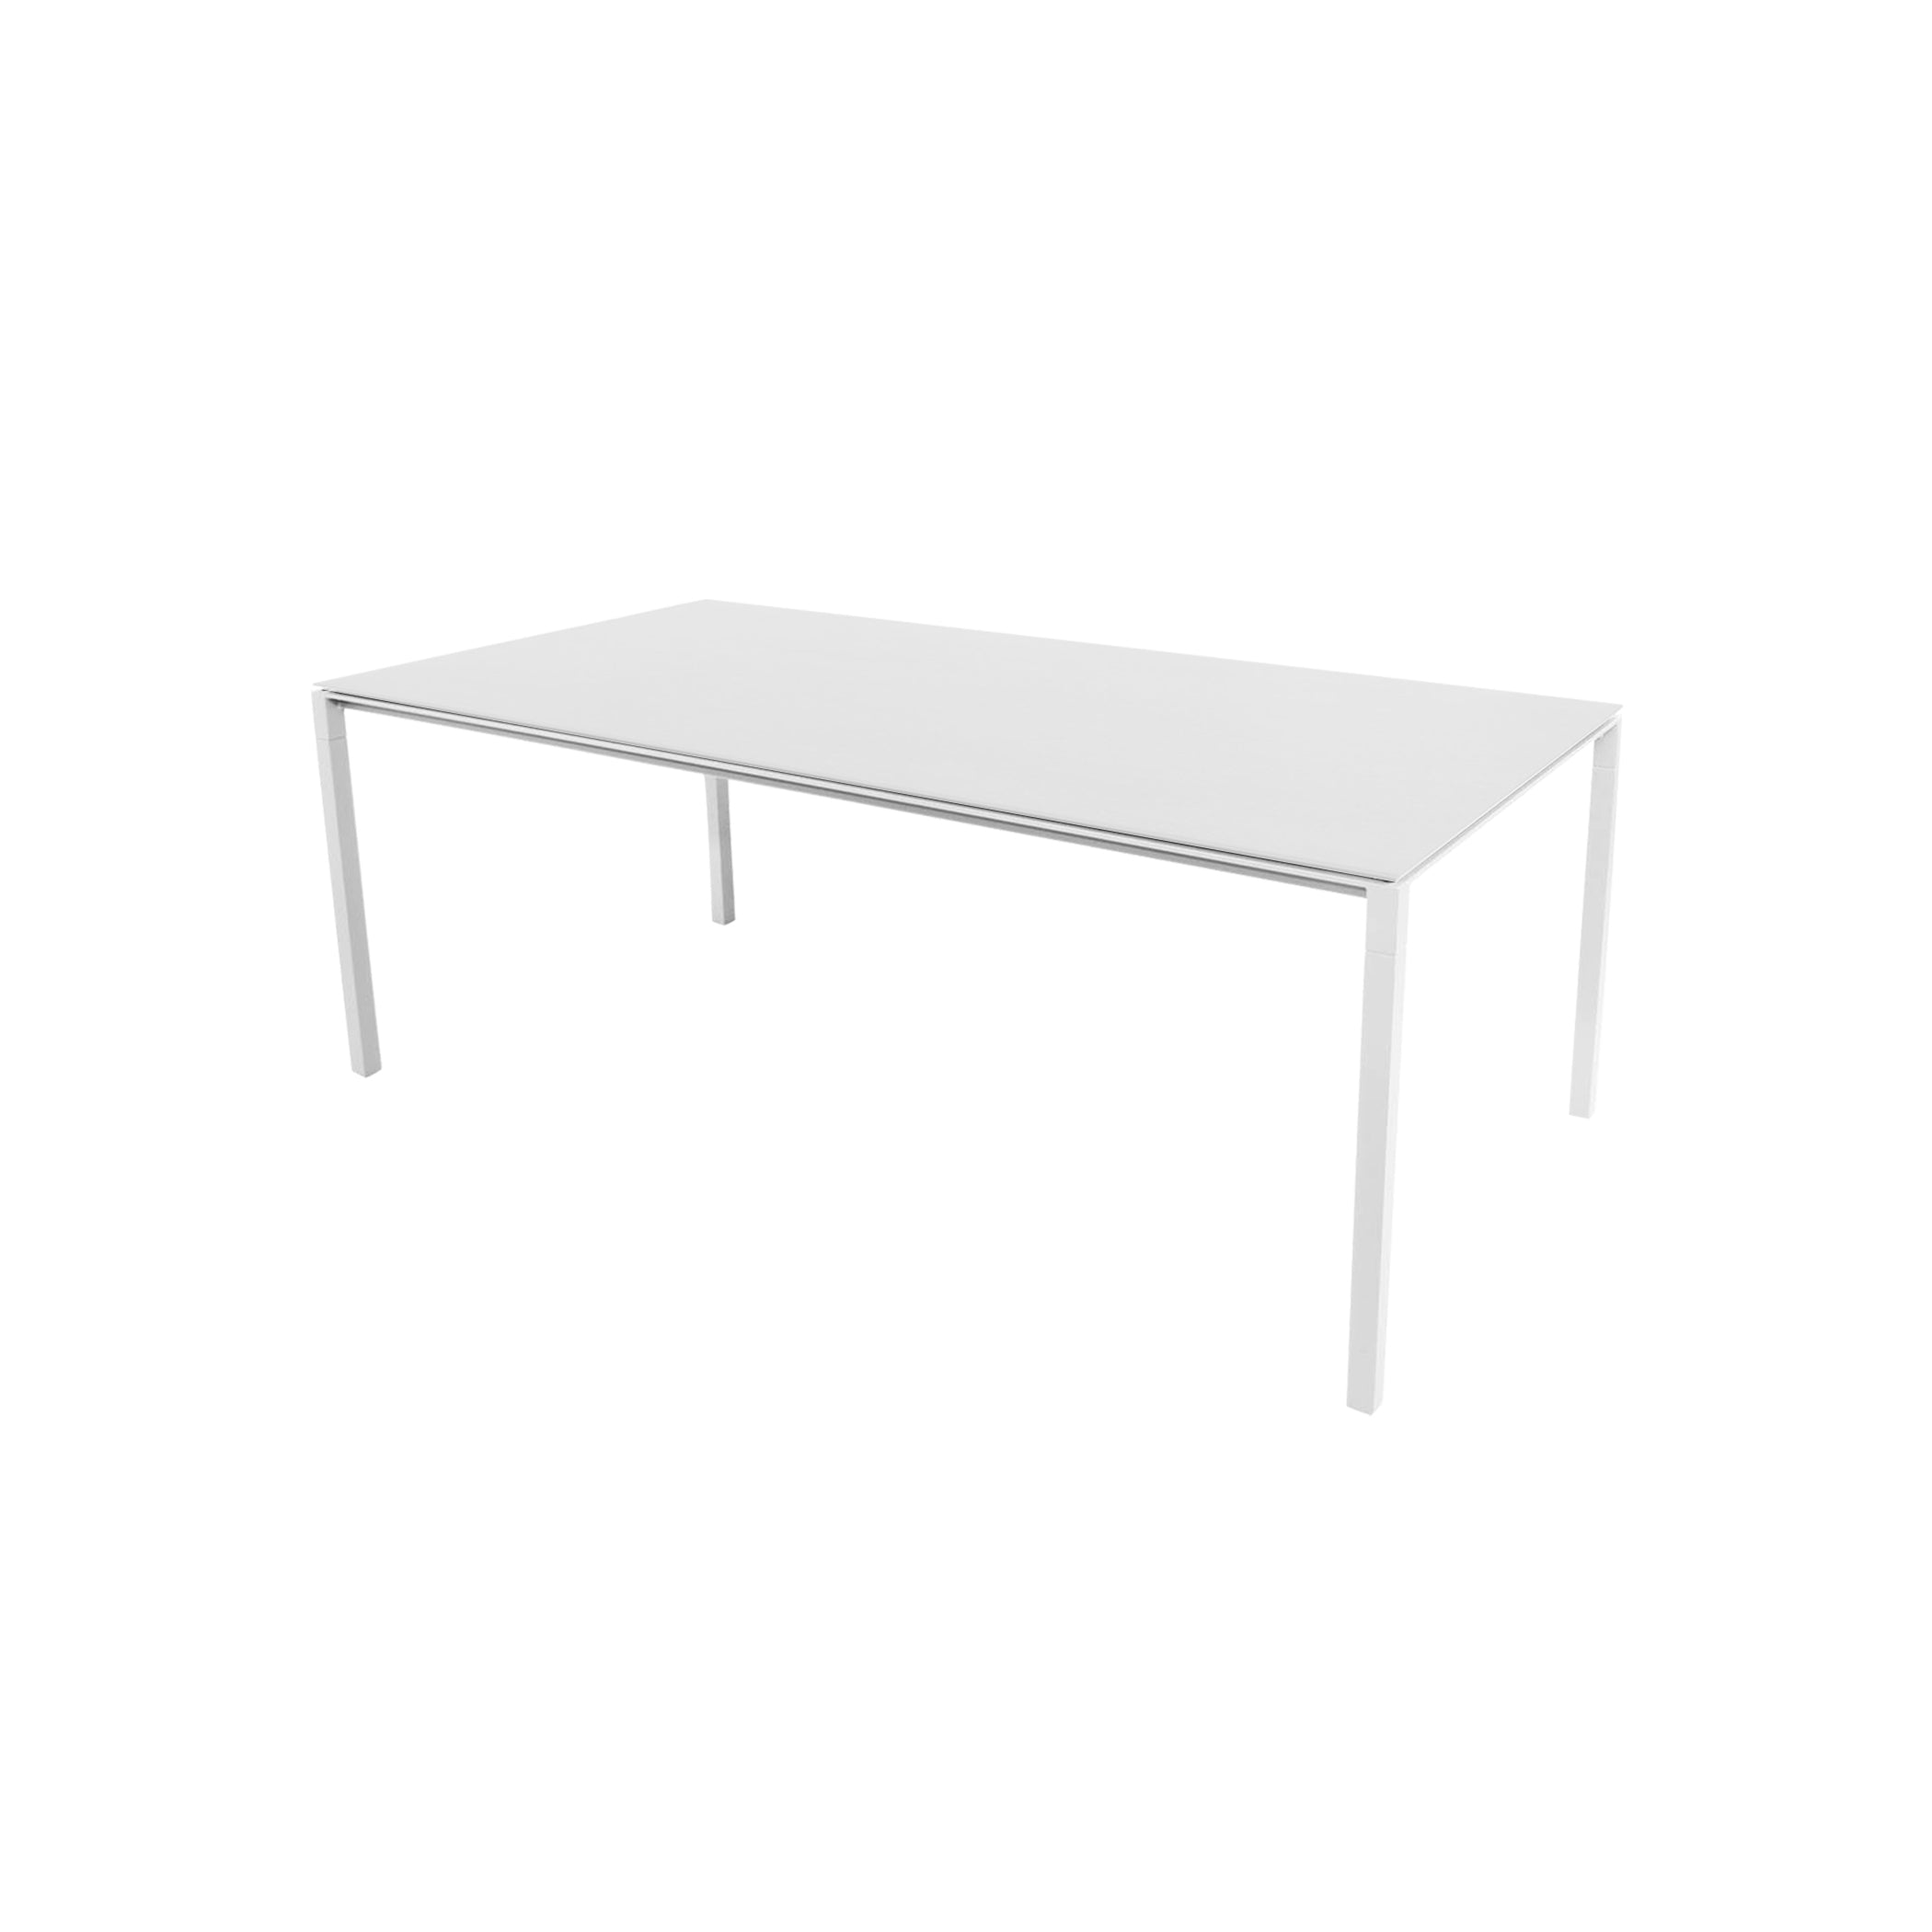 Cane-Line - Pure dining table base, 200x100 cm